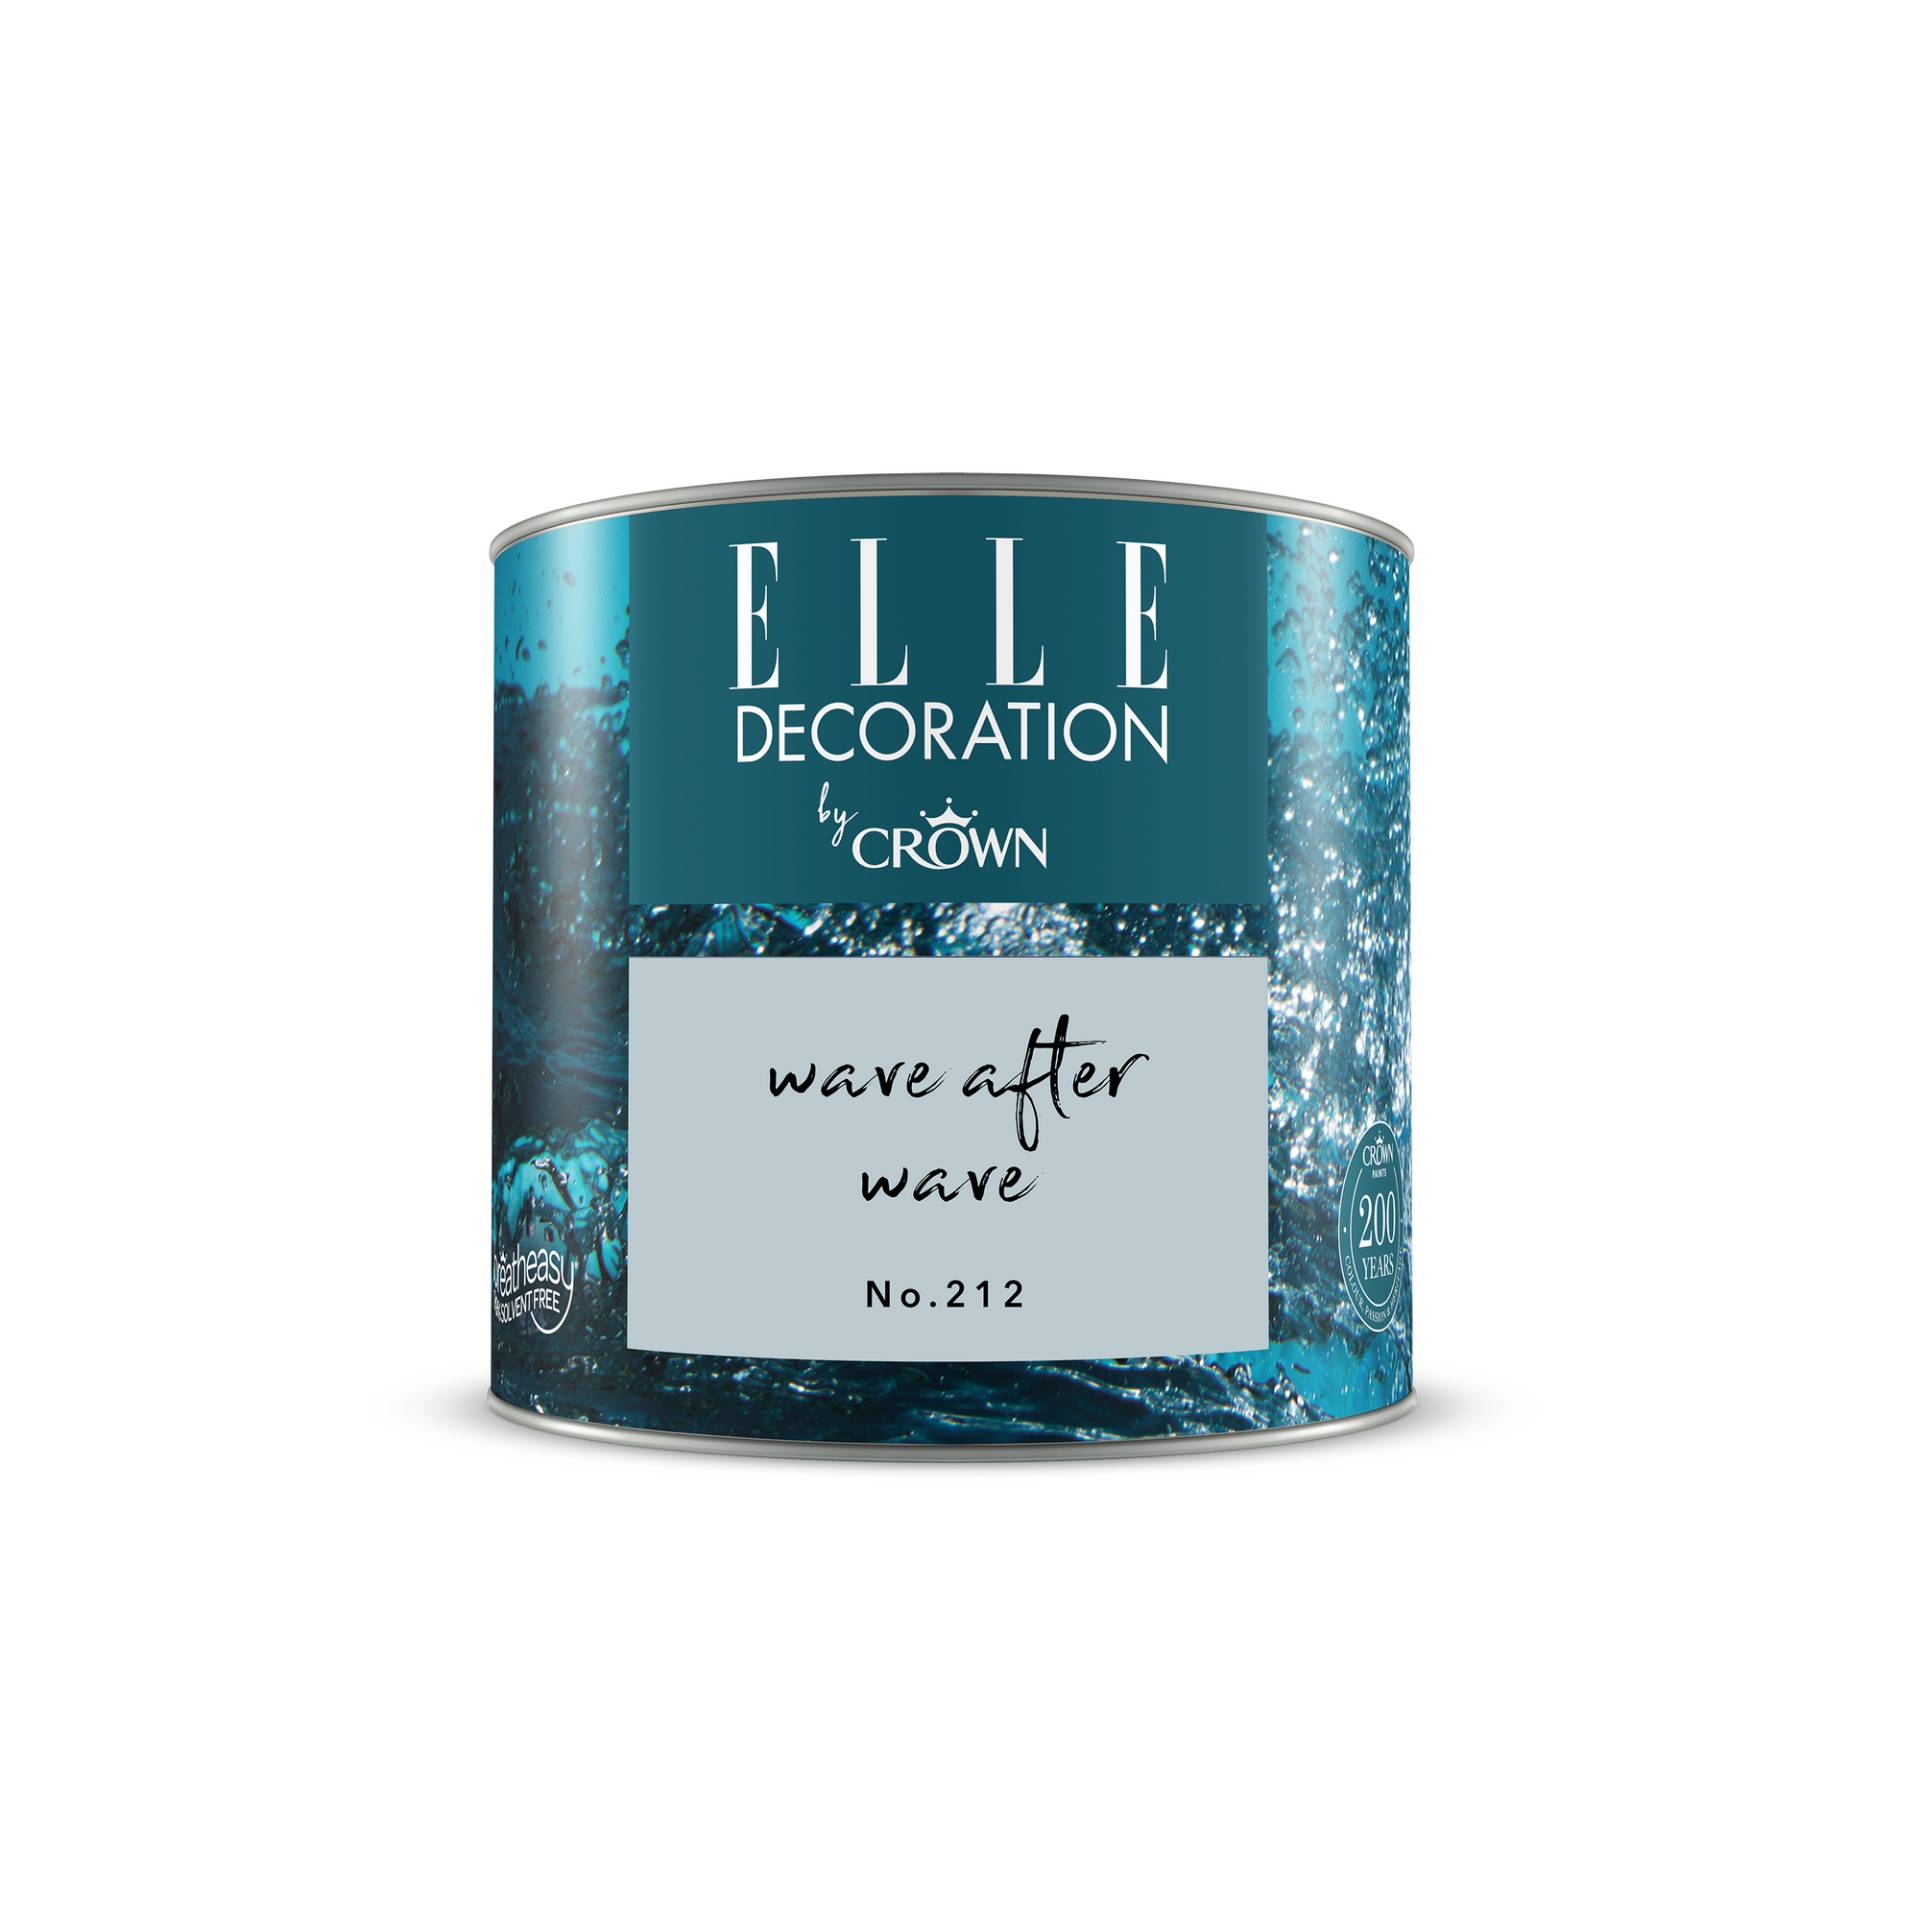 ELLE Decoration by Crown Wandfarbe 'Wave After Wave No. 212' blau matt 125 ml von ELLE Decoration by Crown